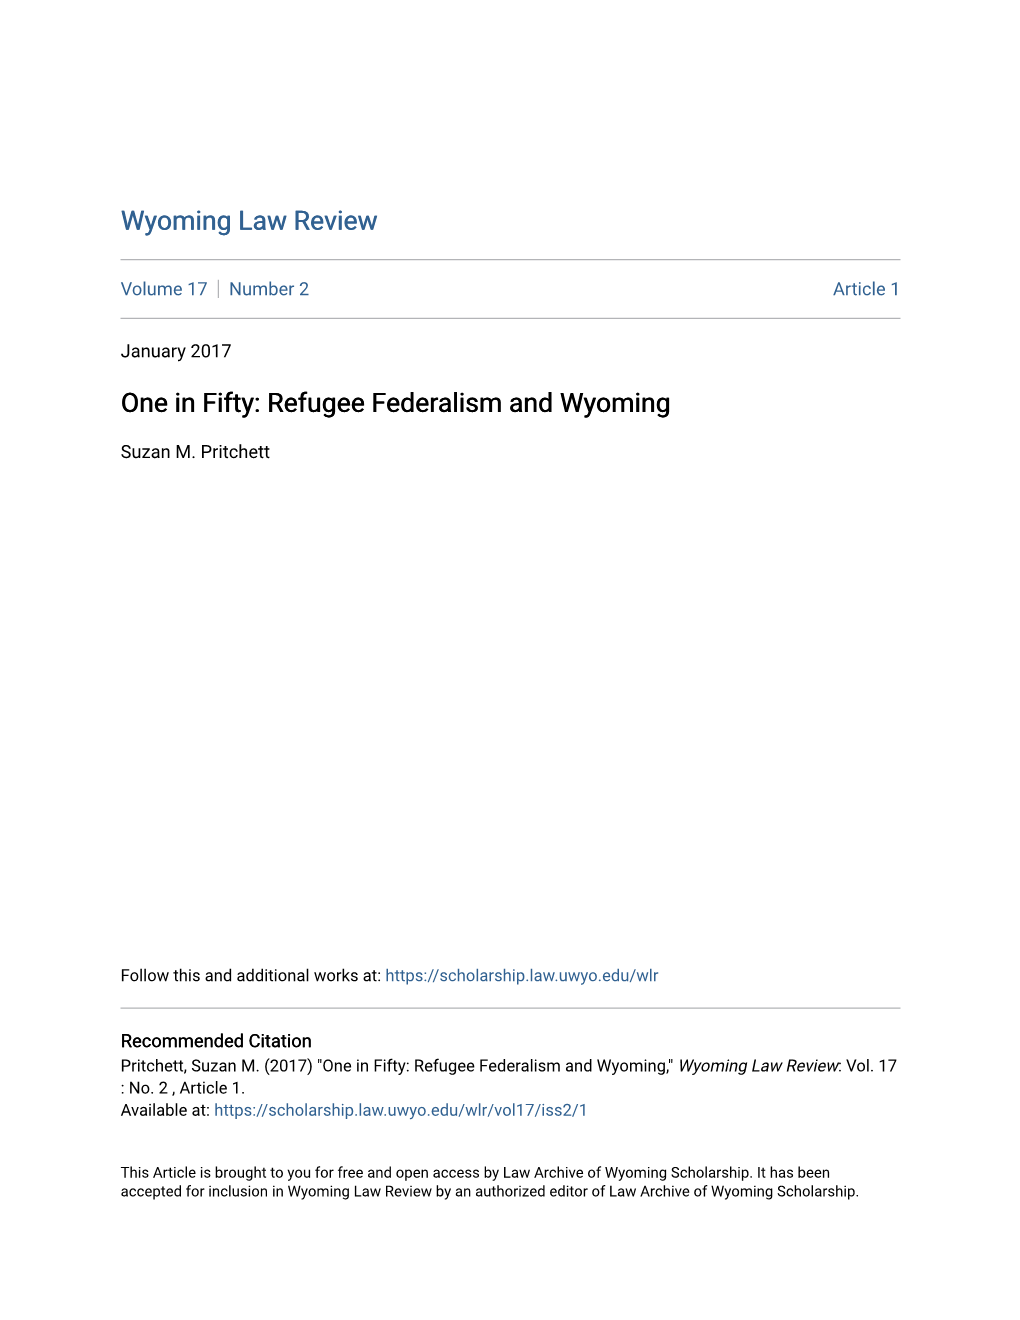 Refugee Federalism and Wyoming